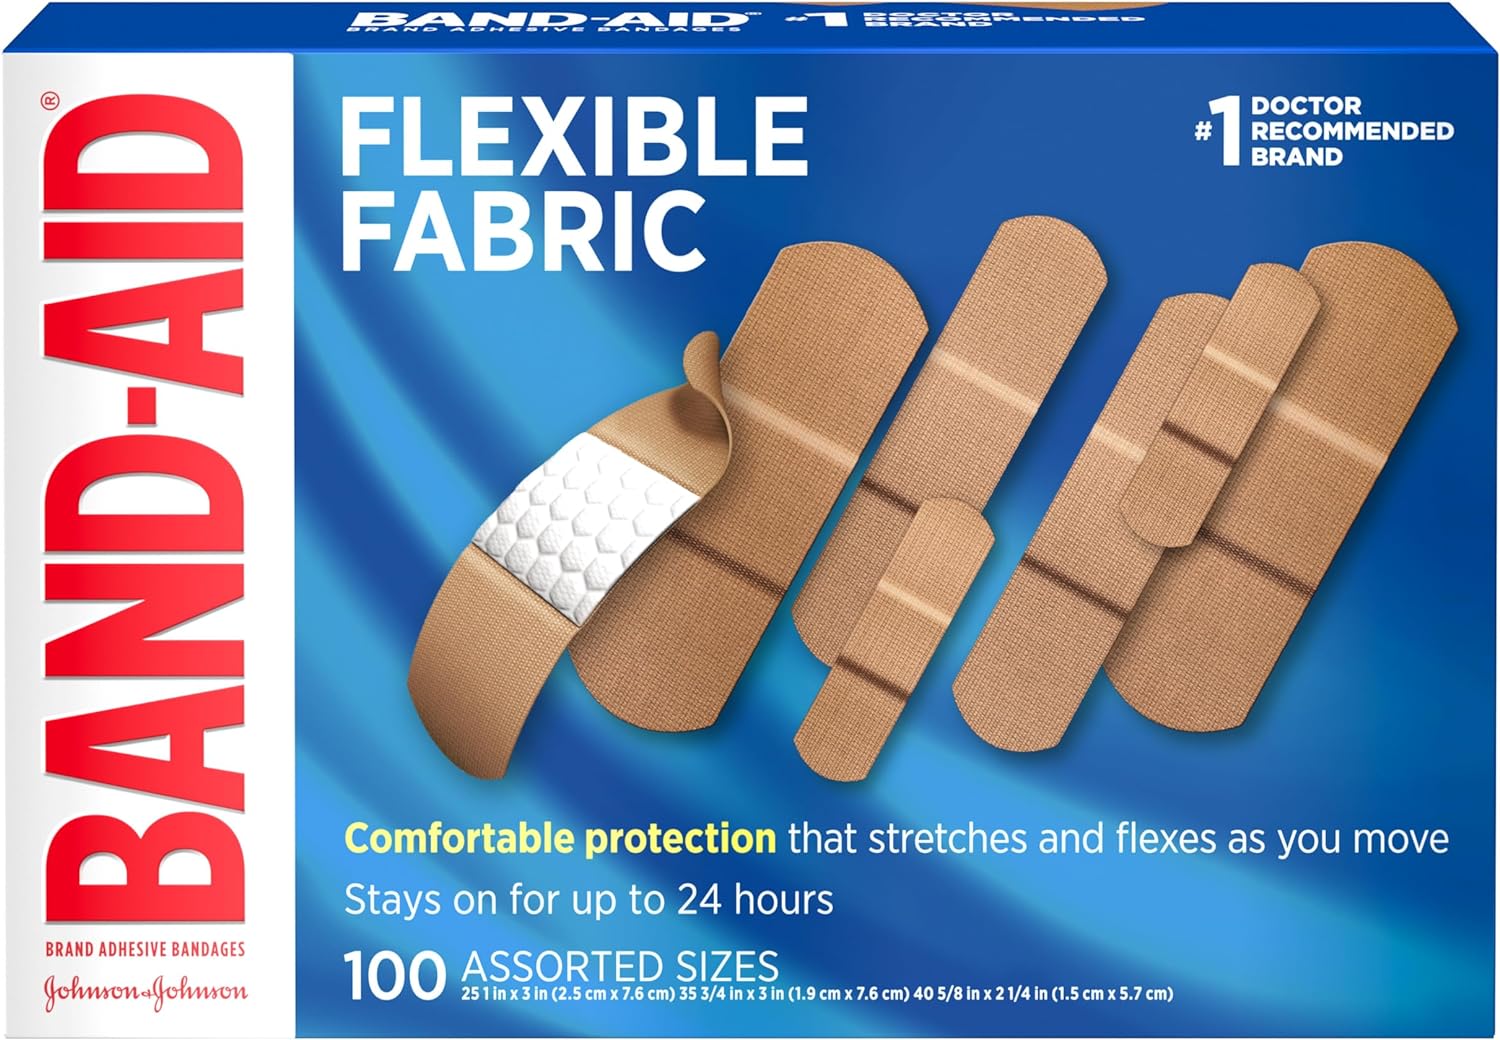 100-Count Band-Aid Flexible Fabric Adhesive Bandages (Various) $5.94 w/ S&S + Free Shipping w/ Prime or on $35+